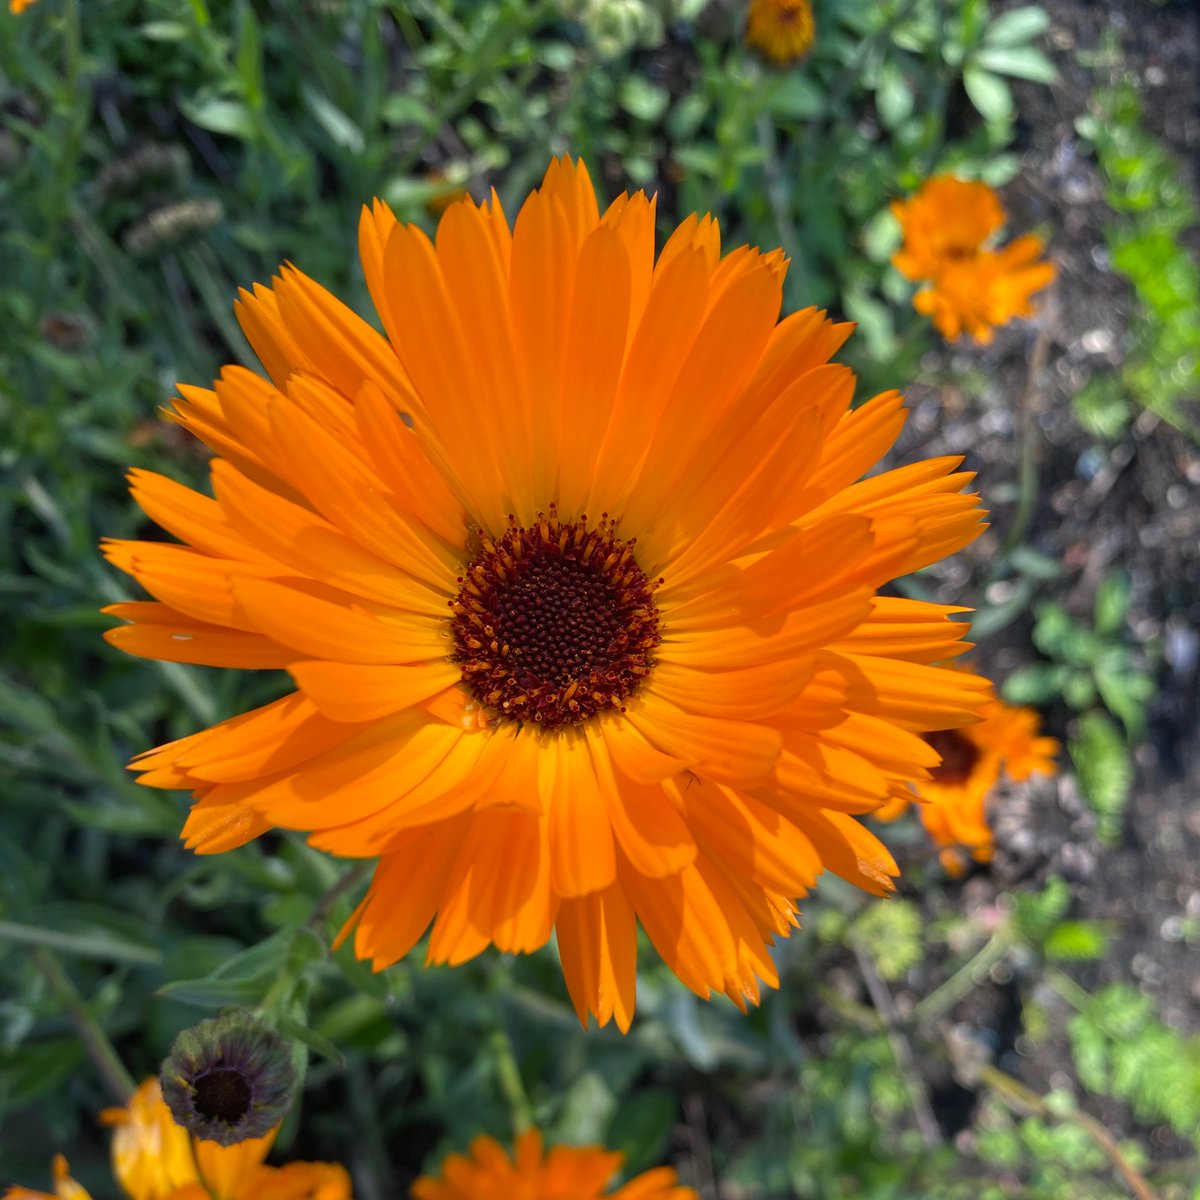 If we could see the miracle of
A single flower clearly,
Our whole life would change.
~ Buddha
 
✨🌺✨
#FlowersOnFriday #JoyTrain #NatureBeauty #StarfishClub #ConsciousPlanet #Awareness #innerpeace #WorldPeace #NaturePhotography #FlowerFriday #KindnessMatters #nature 🌻